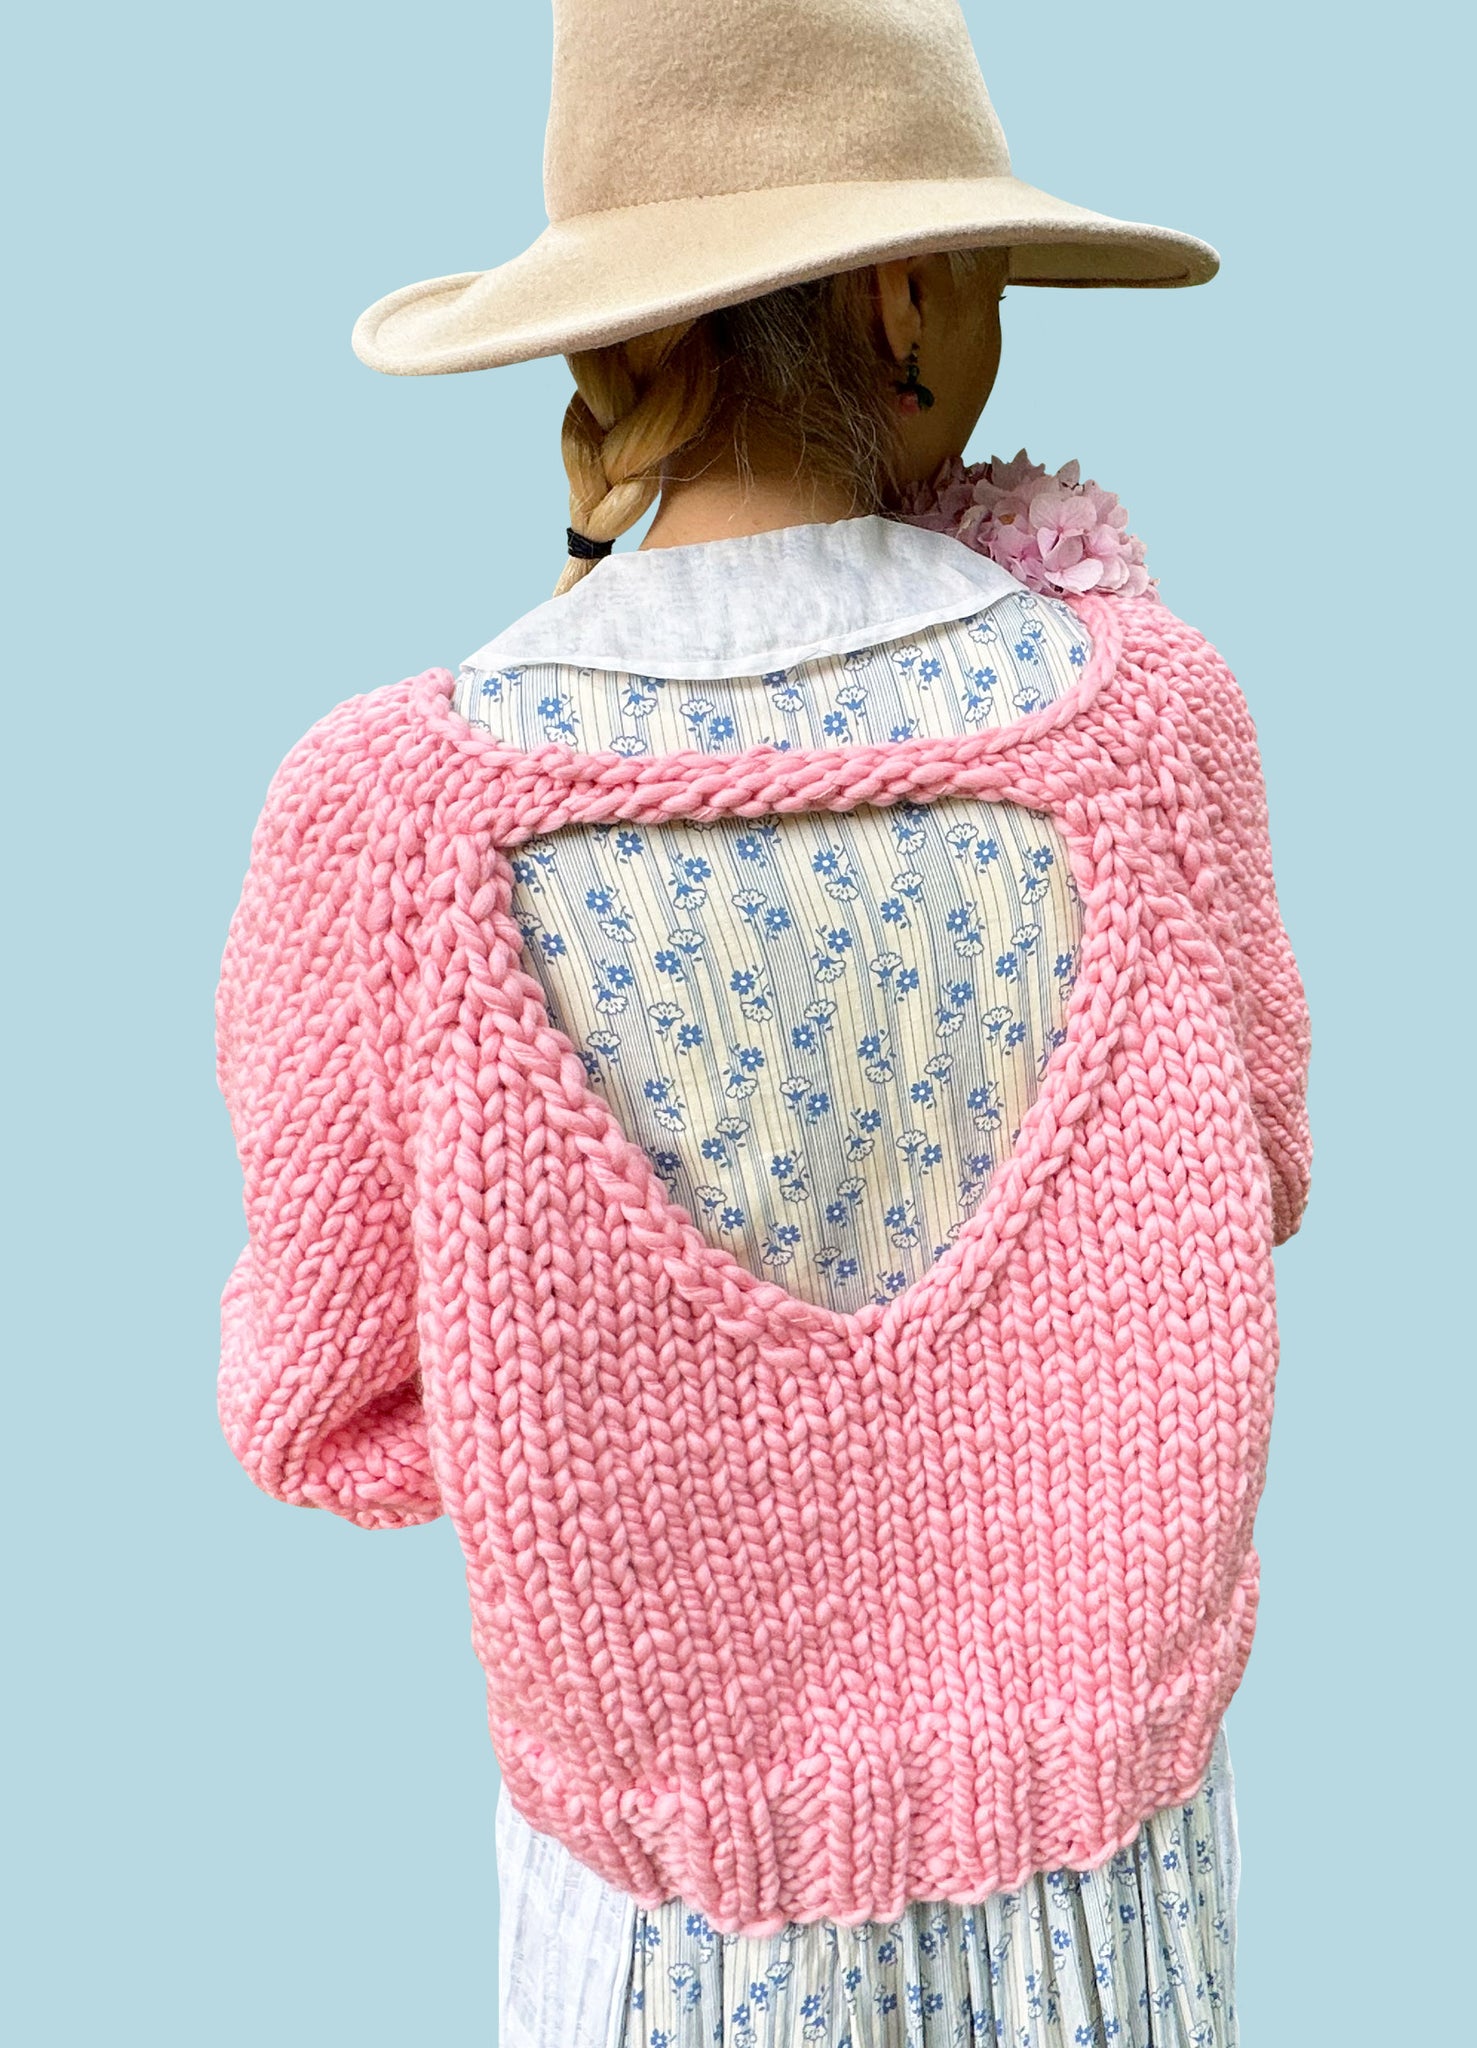 Video Class: How To Knit Sweetheart Sweater Step-by-Step